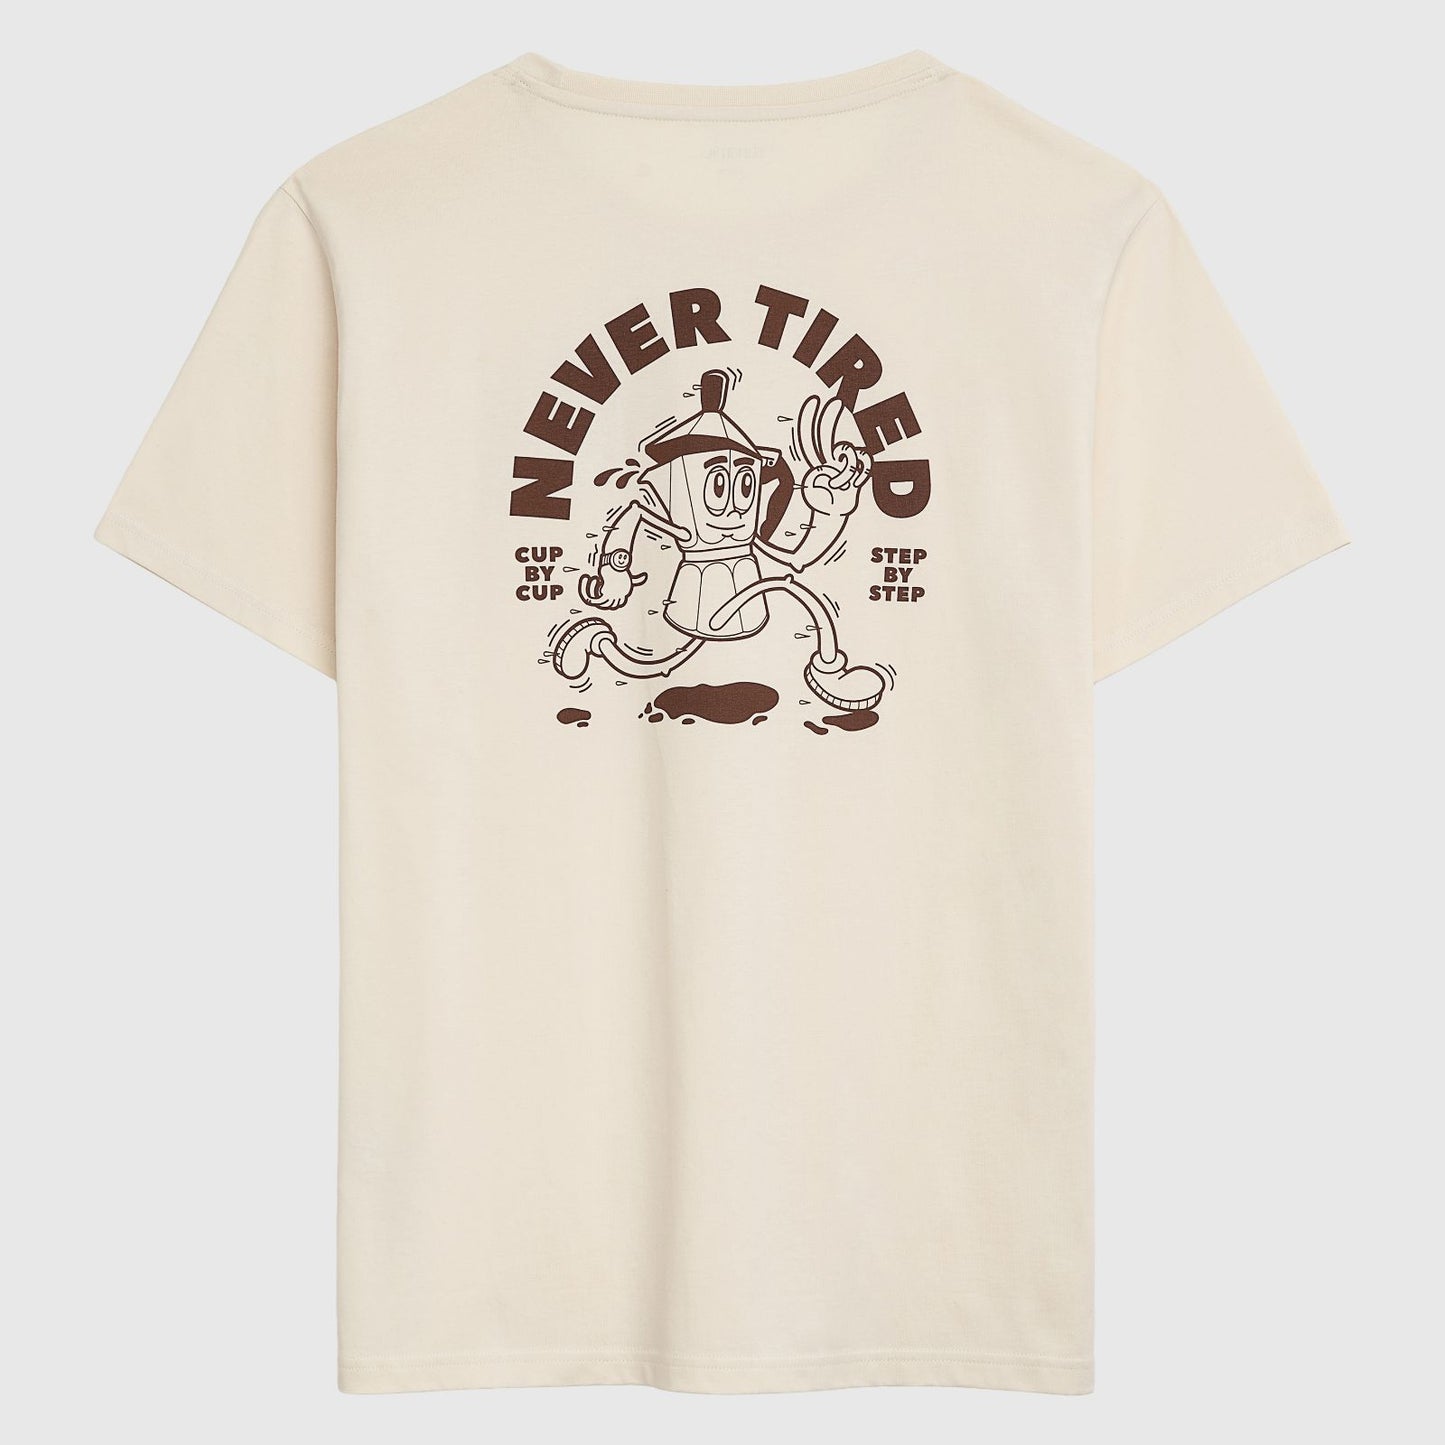 Never Tired T-Shirt, Biobaumwolle, unisex, undyed